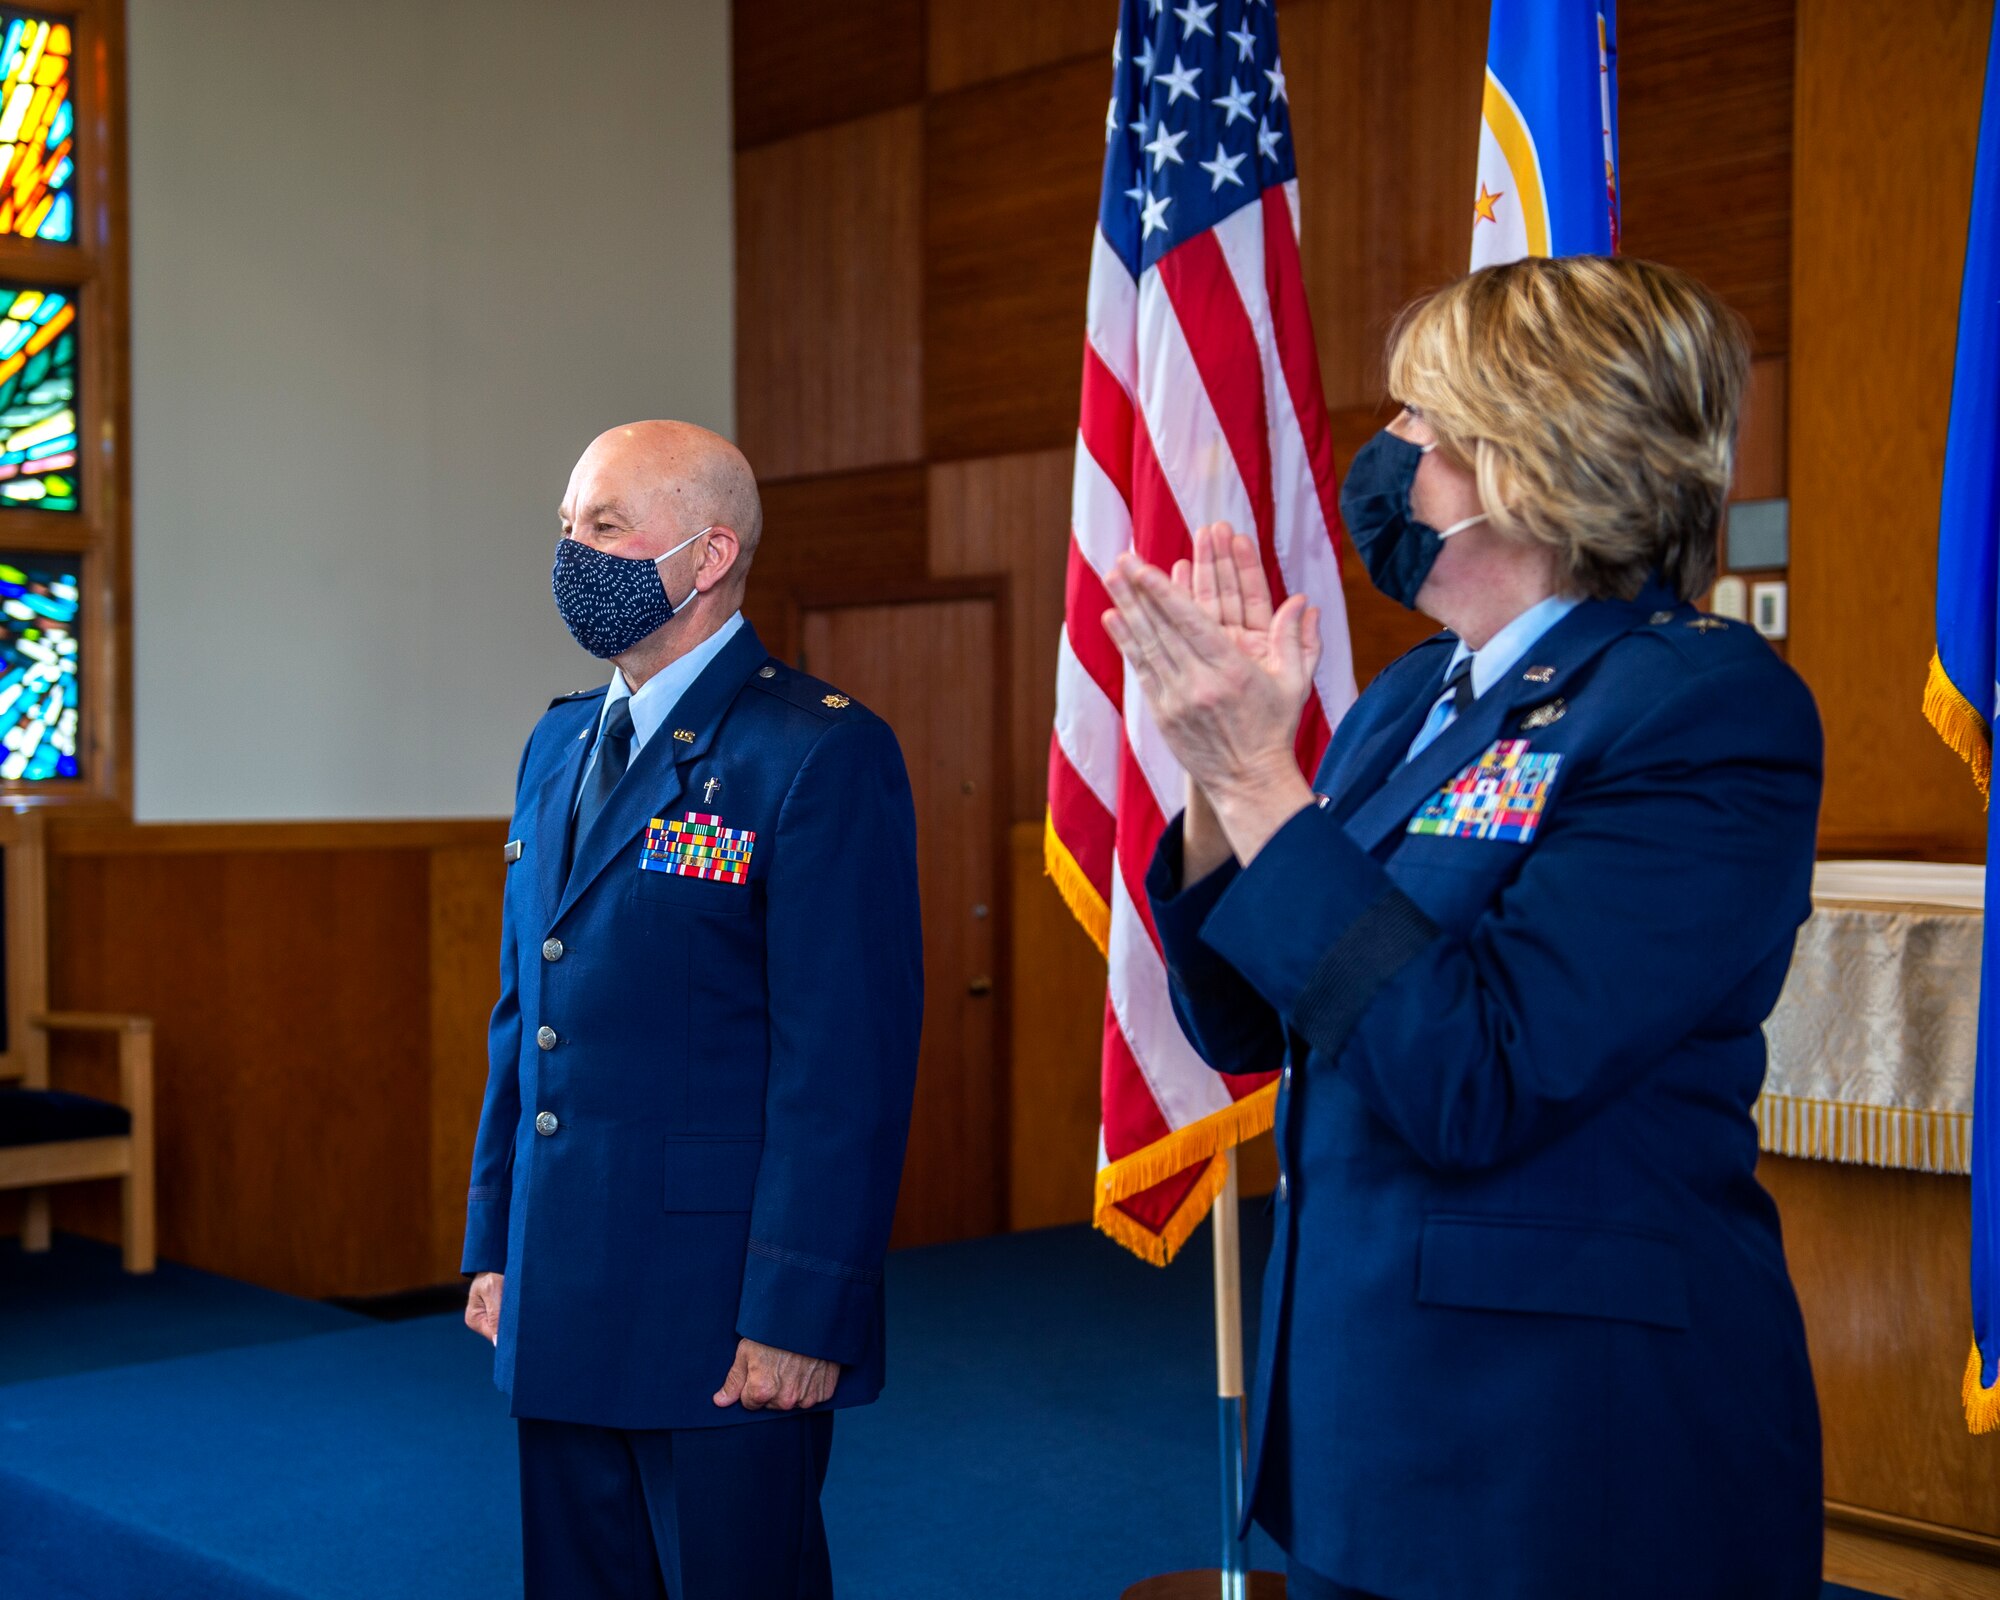 U.S. Air Force Ch. (Lt. Col.) Daniel Pulju is promoted to the rank of Colonel in St. Paul, Minn., Apr. 18, 2021.